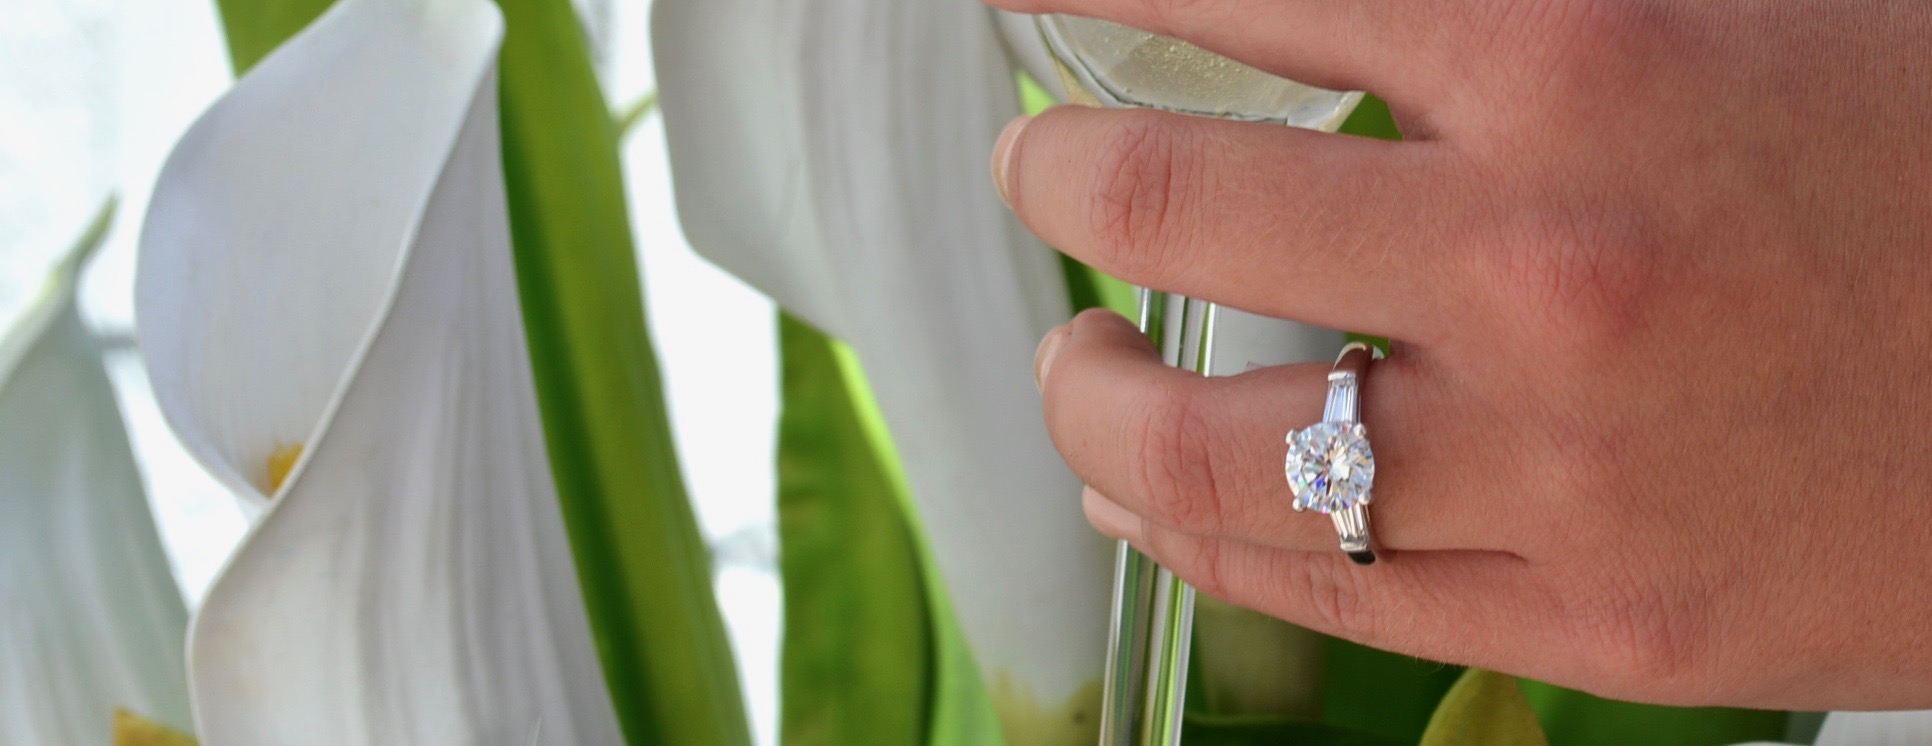 engagement rings adelaide by pure envy